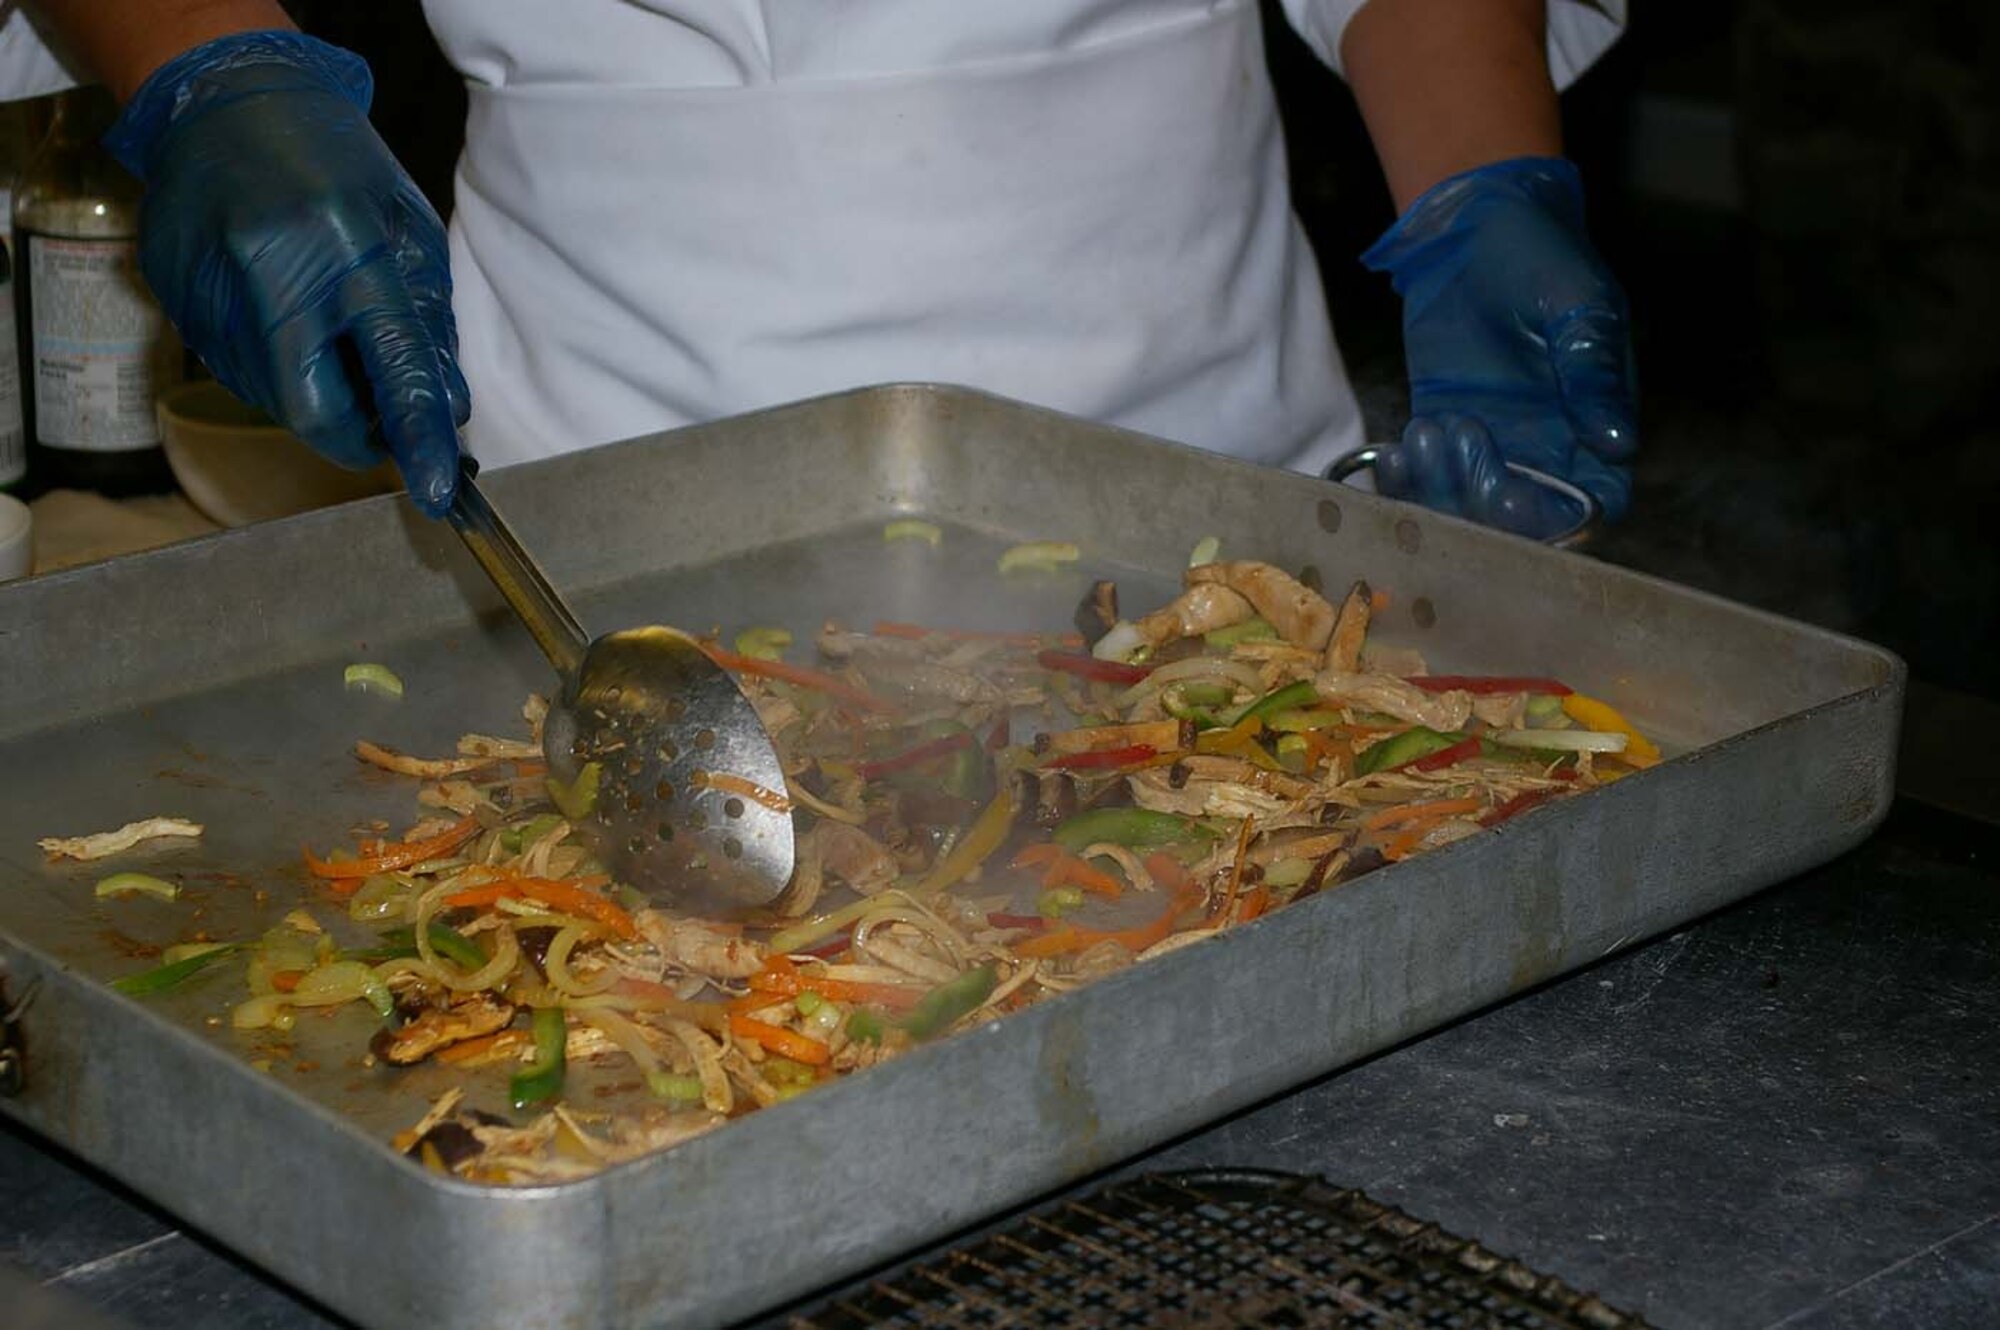 Airman 1st Class Ron Gamo, 100th Services Squadron, cooks pancit at the Gateway Dining Facility May 4 as part of a cooking demonstration for Asian-Pacific Heritage Month. He also showed audience members how to cook chicken adobo and shrimp fried rice. (U.S. Air Force photo by Karen Abeyasekere)